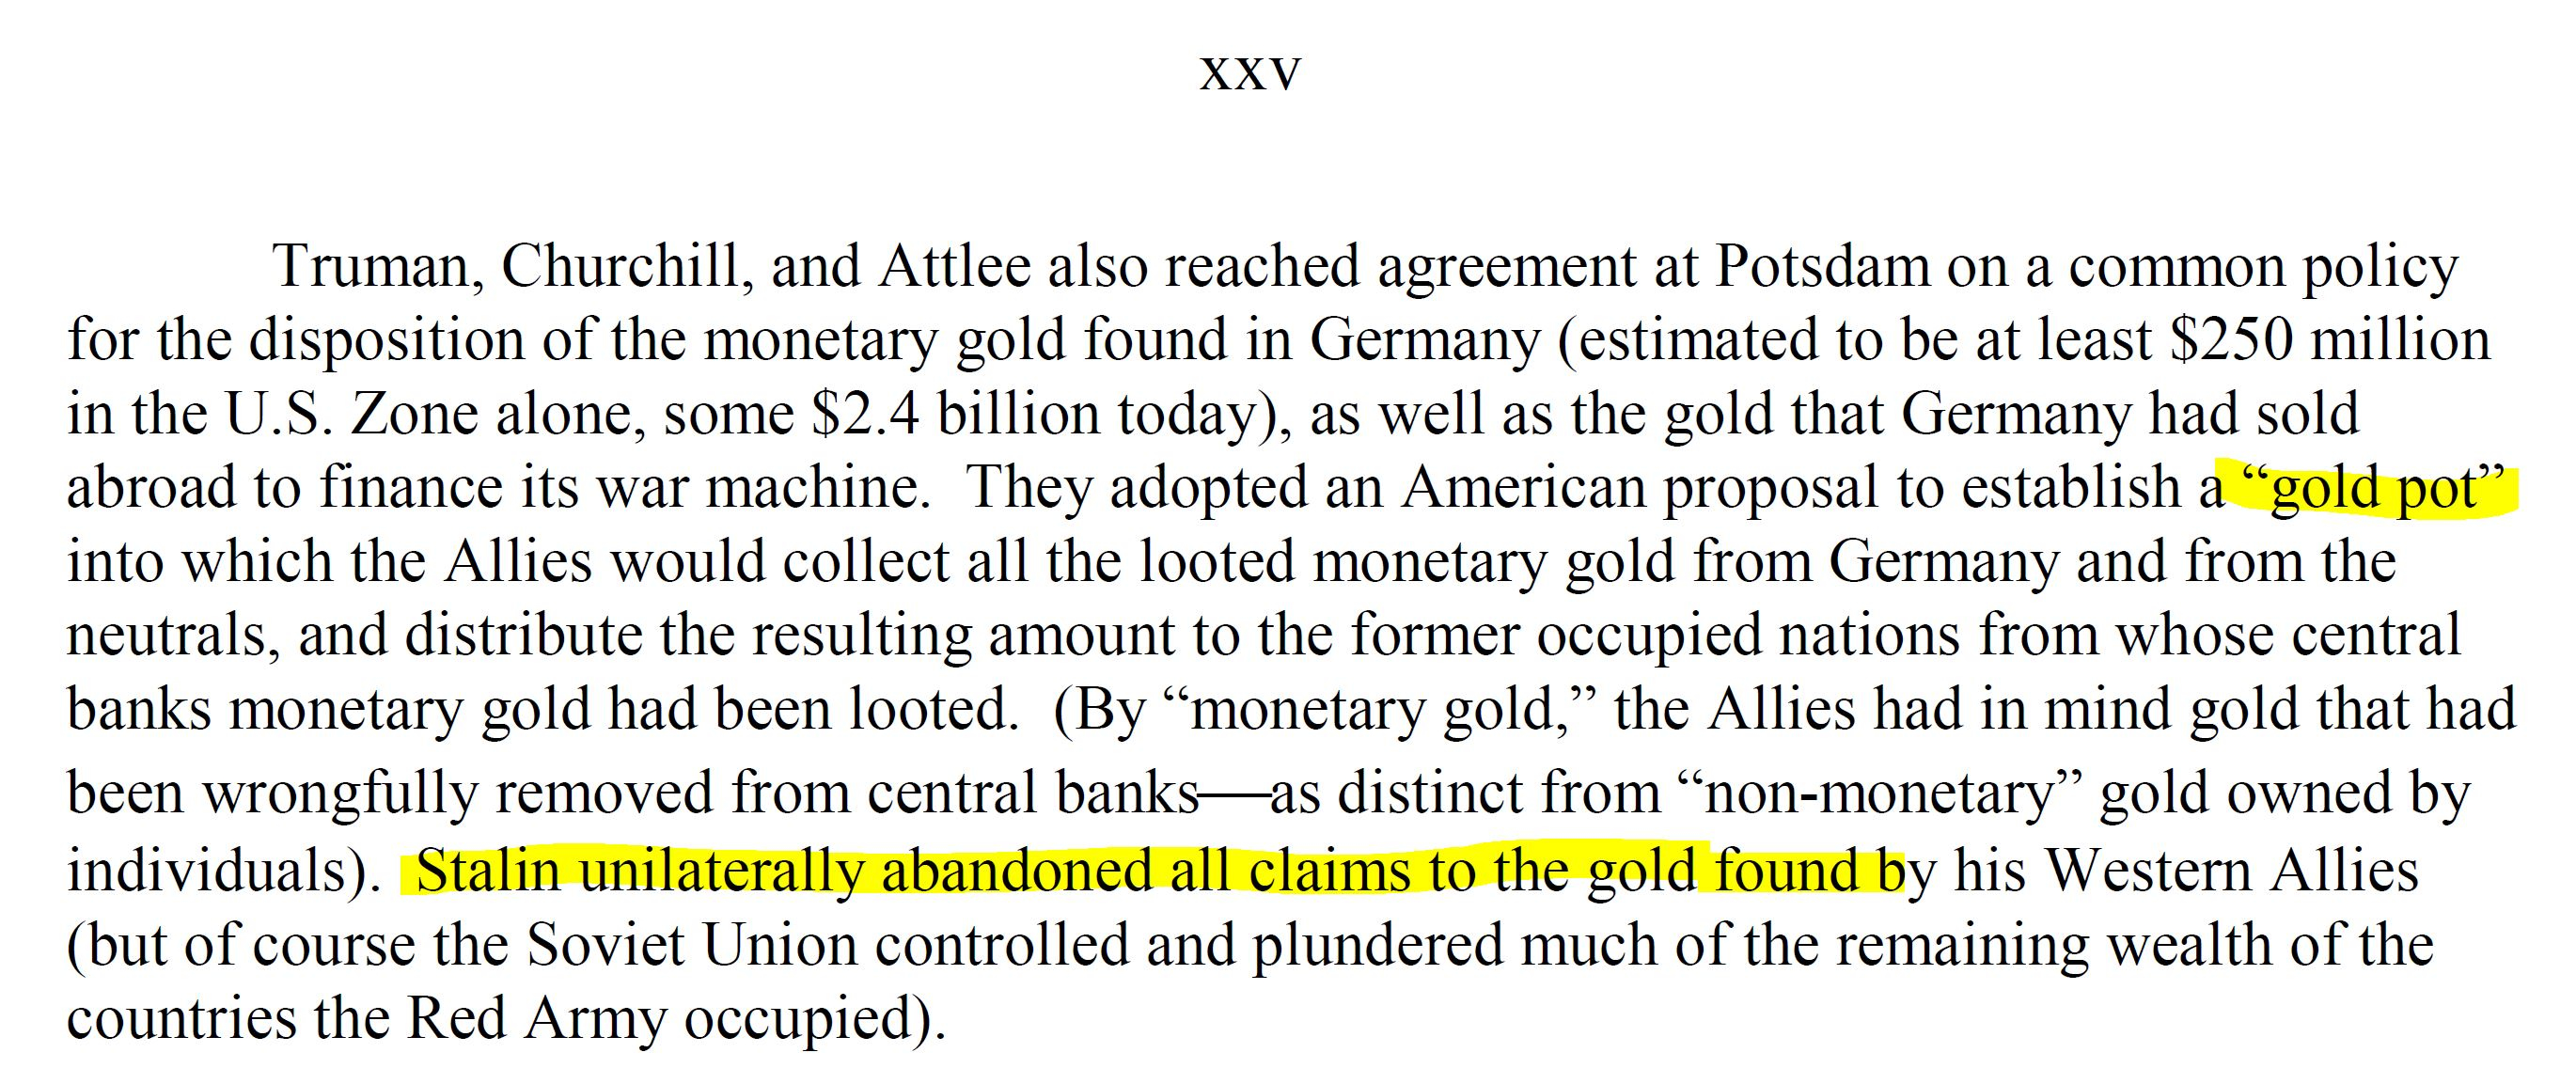 Stuart E. Eizenstat. (May 01, 1997). Nazi Swiss Gold Claims, Doc. No. 05, U.S. and Allied Efforts To Recover and Restore Gold and Other Assets Stolen or Hidden by Germany During World War II - Preliminary Study. U.S. State Department.